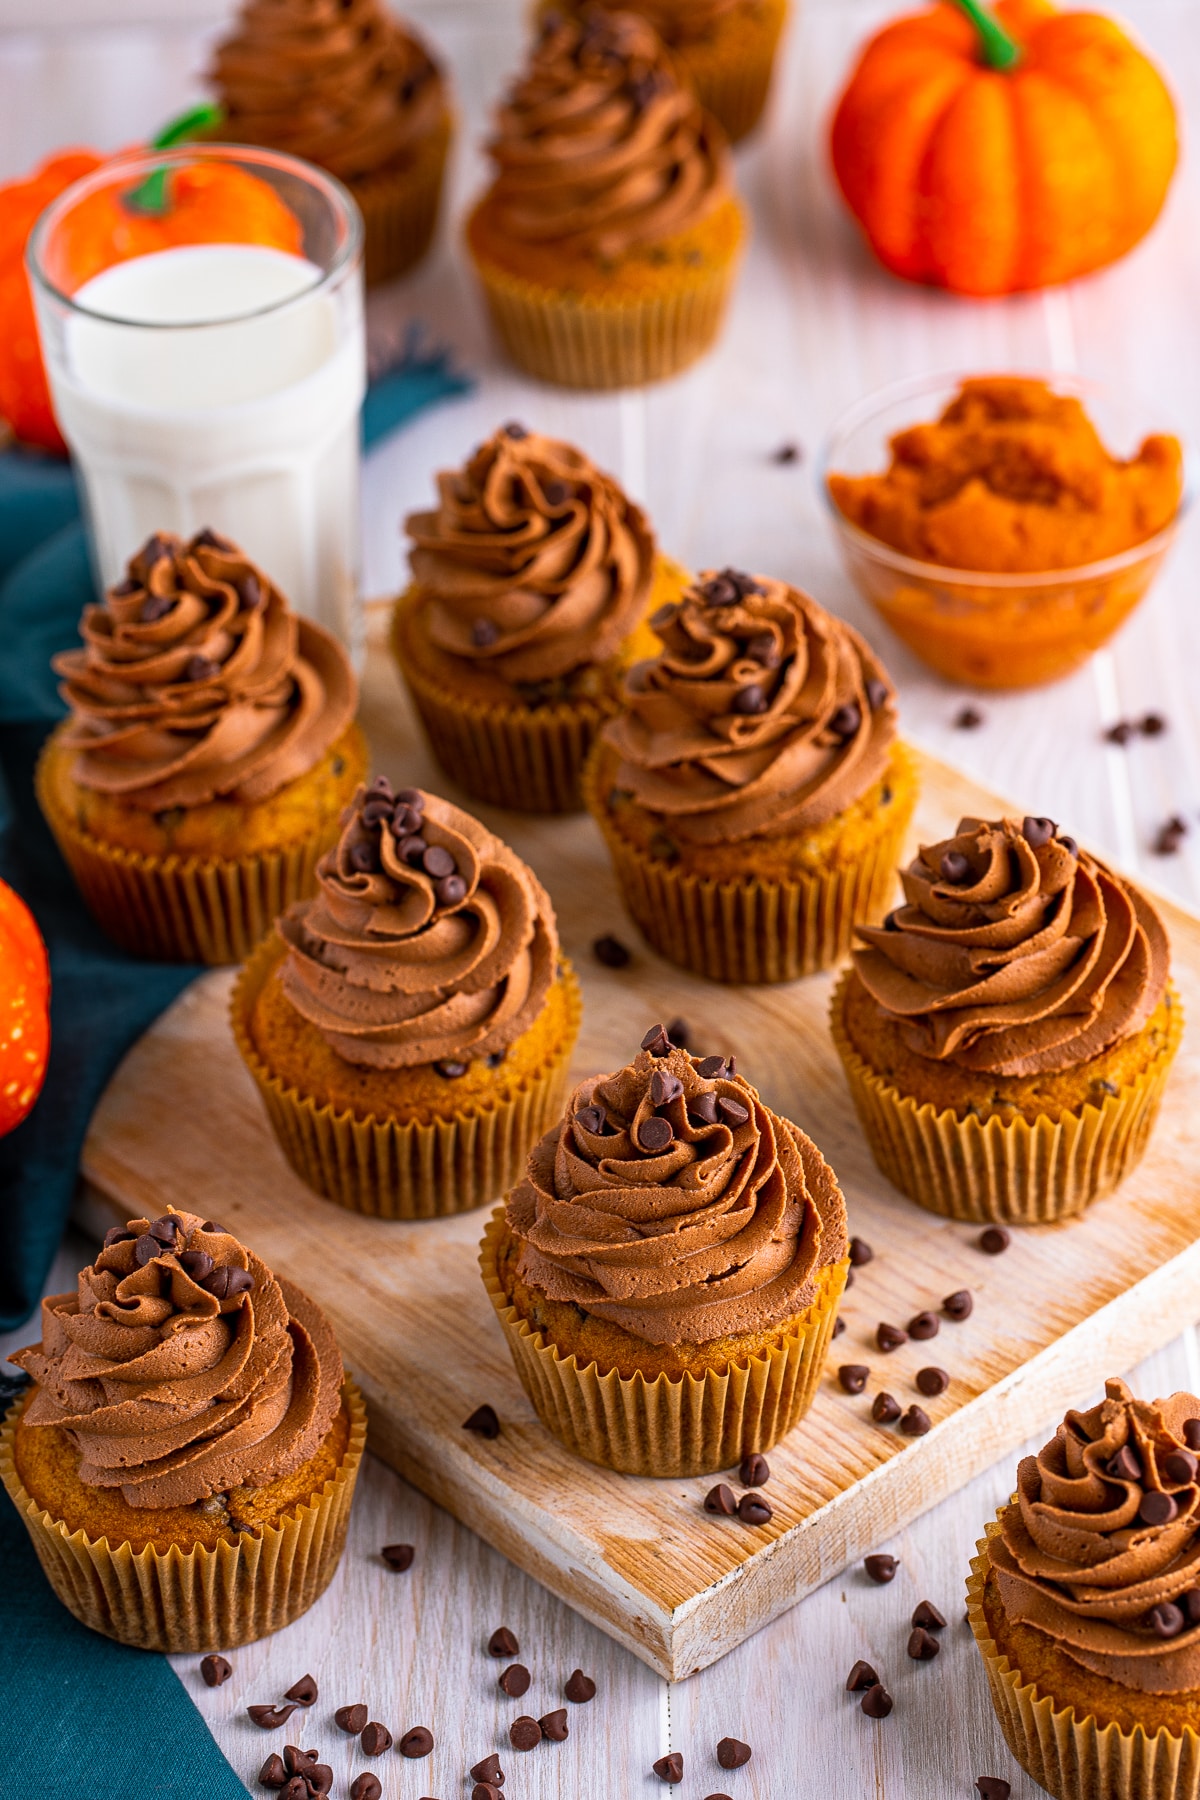 Chocolate Chip Pumpkin Cupcakes on wooden board with milk, chocolate chips and pumpkins in background.